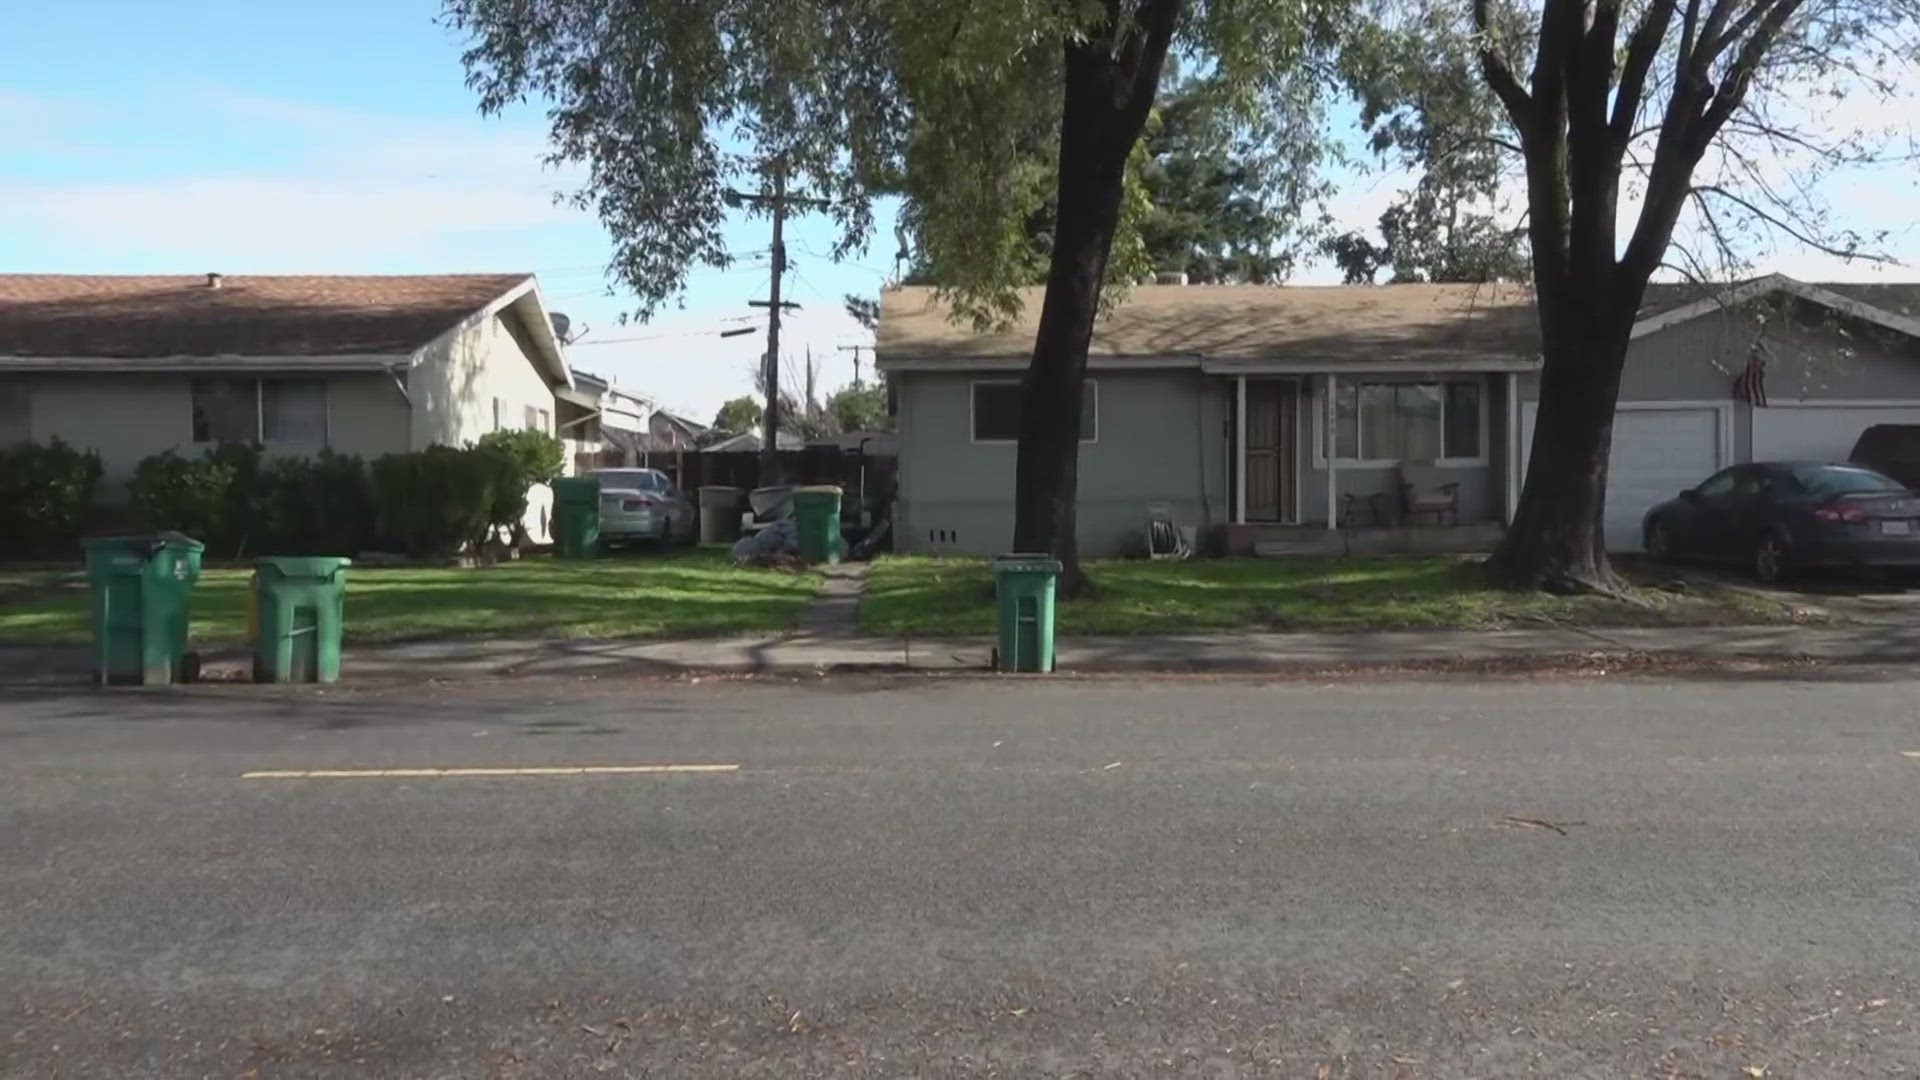 Stockton residents and businesses clean up after Wednesday's storm